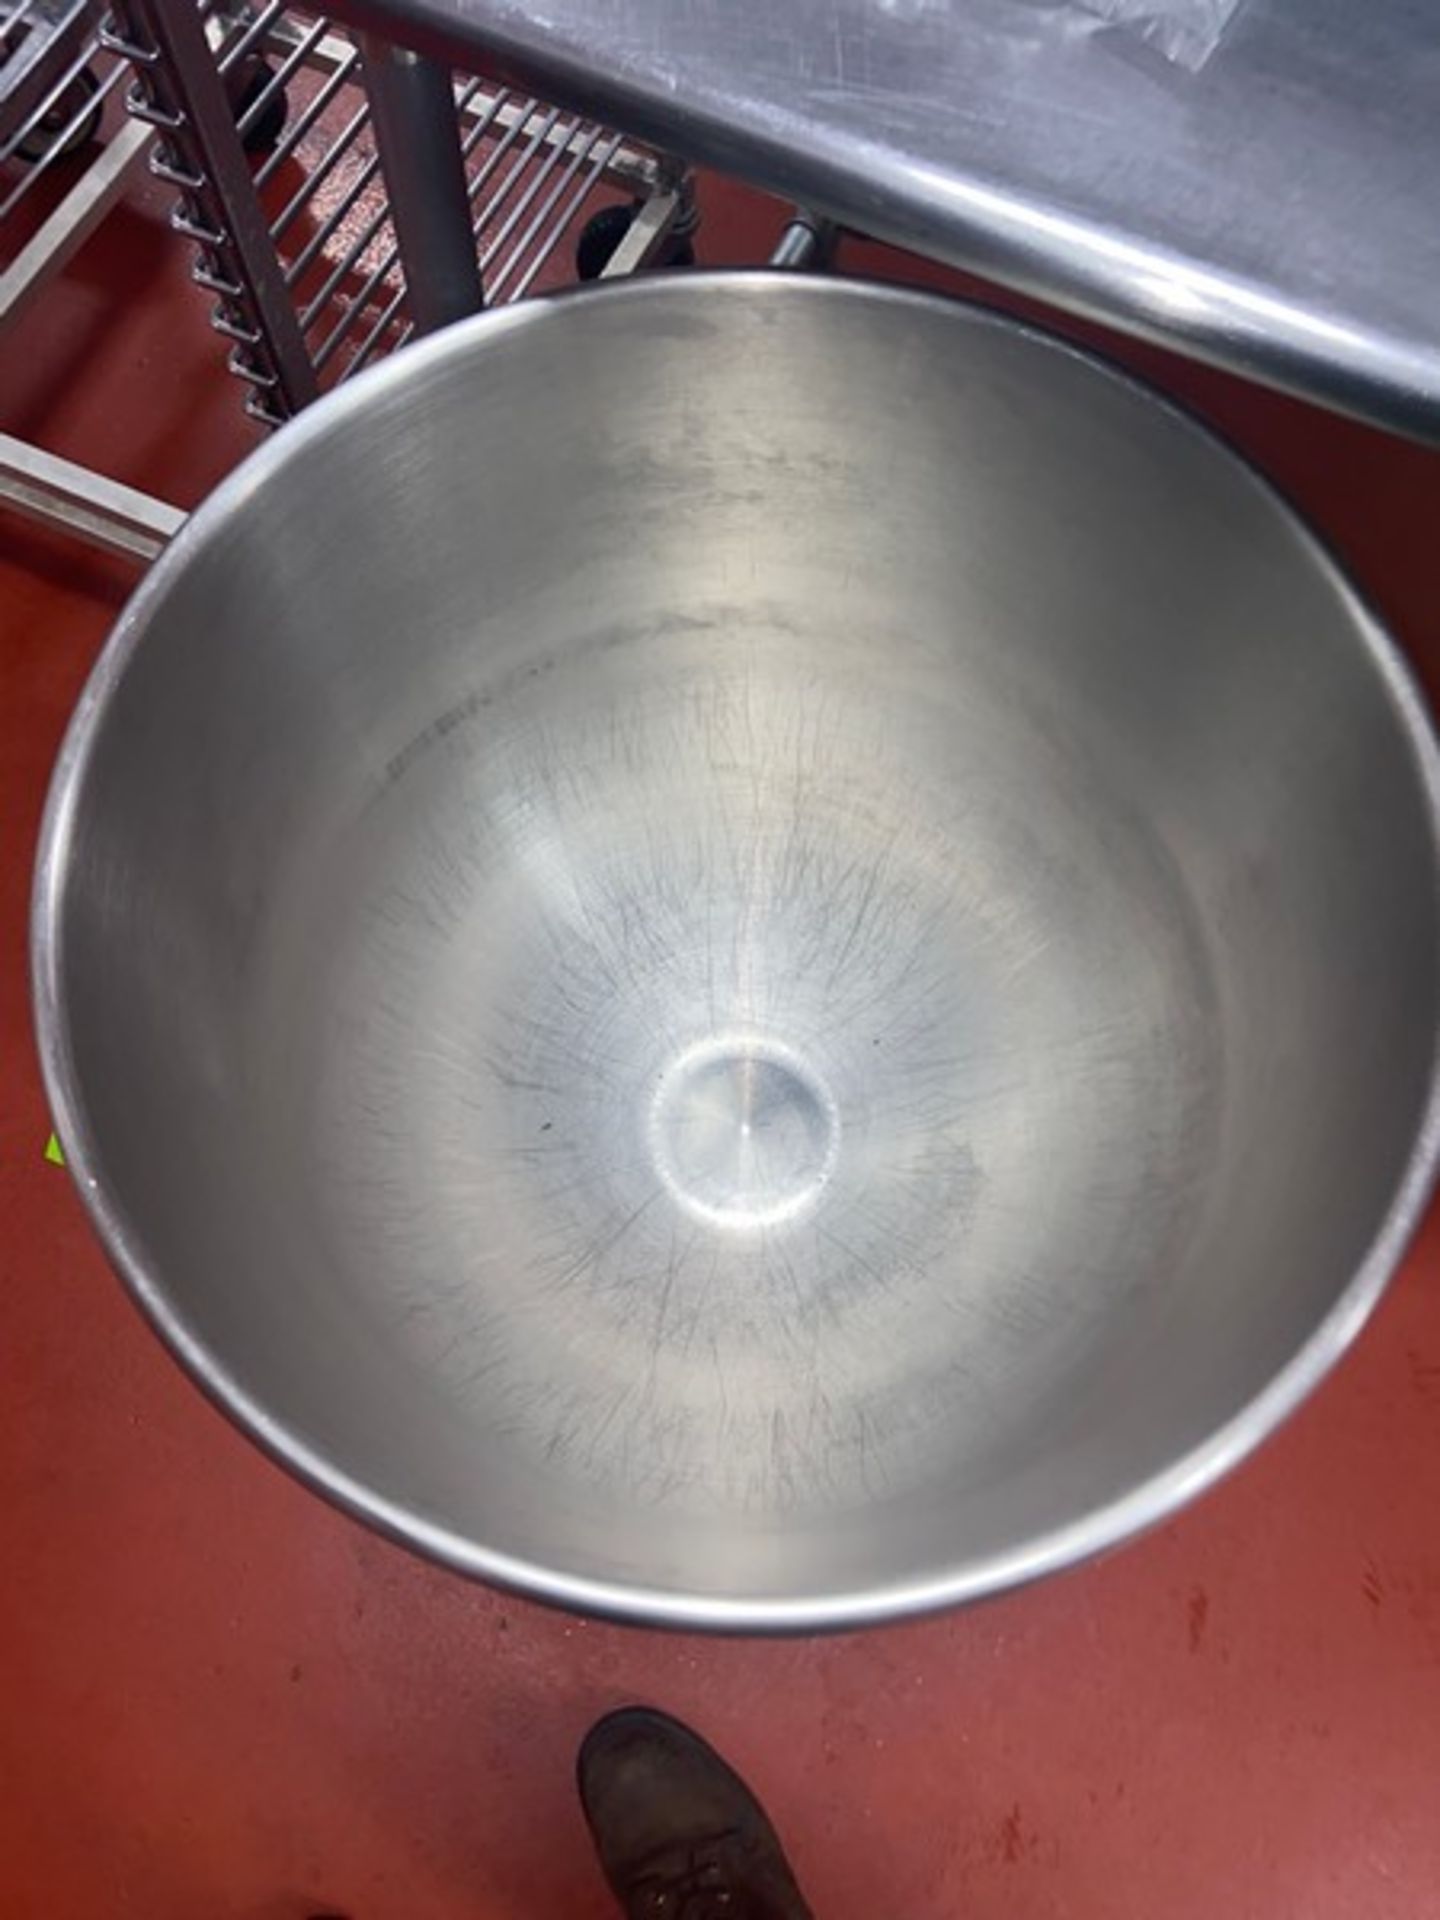 S/S Mixing Bowl, with Bowl Skate, Internal Dims. of Bowl: Aprox. 22" Dia. x 24" Deep (LOCATED IN RED - Image 3 of 3